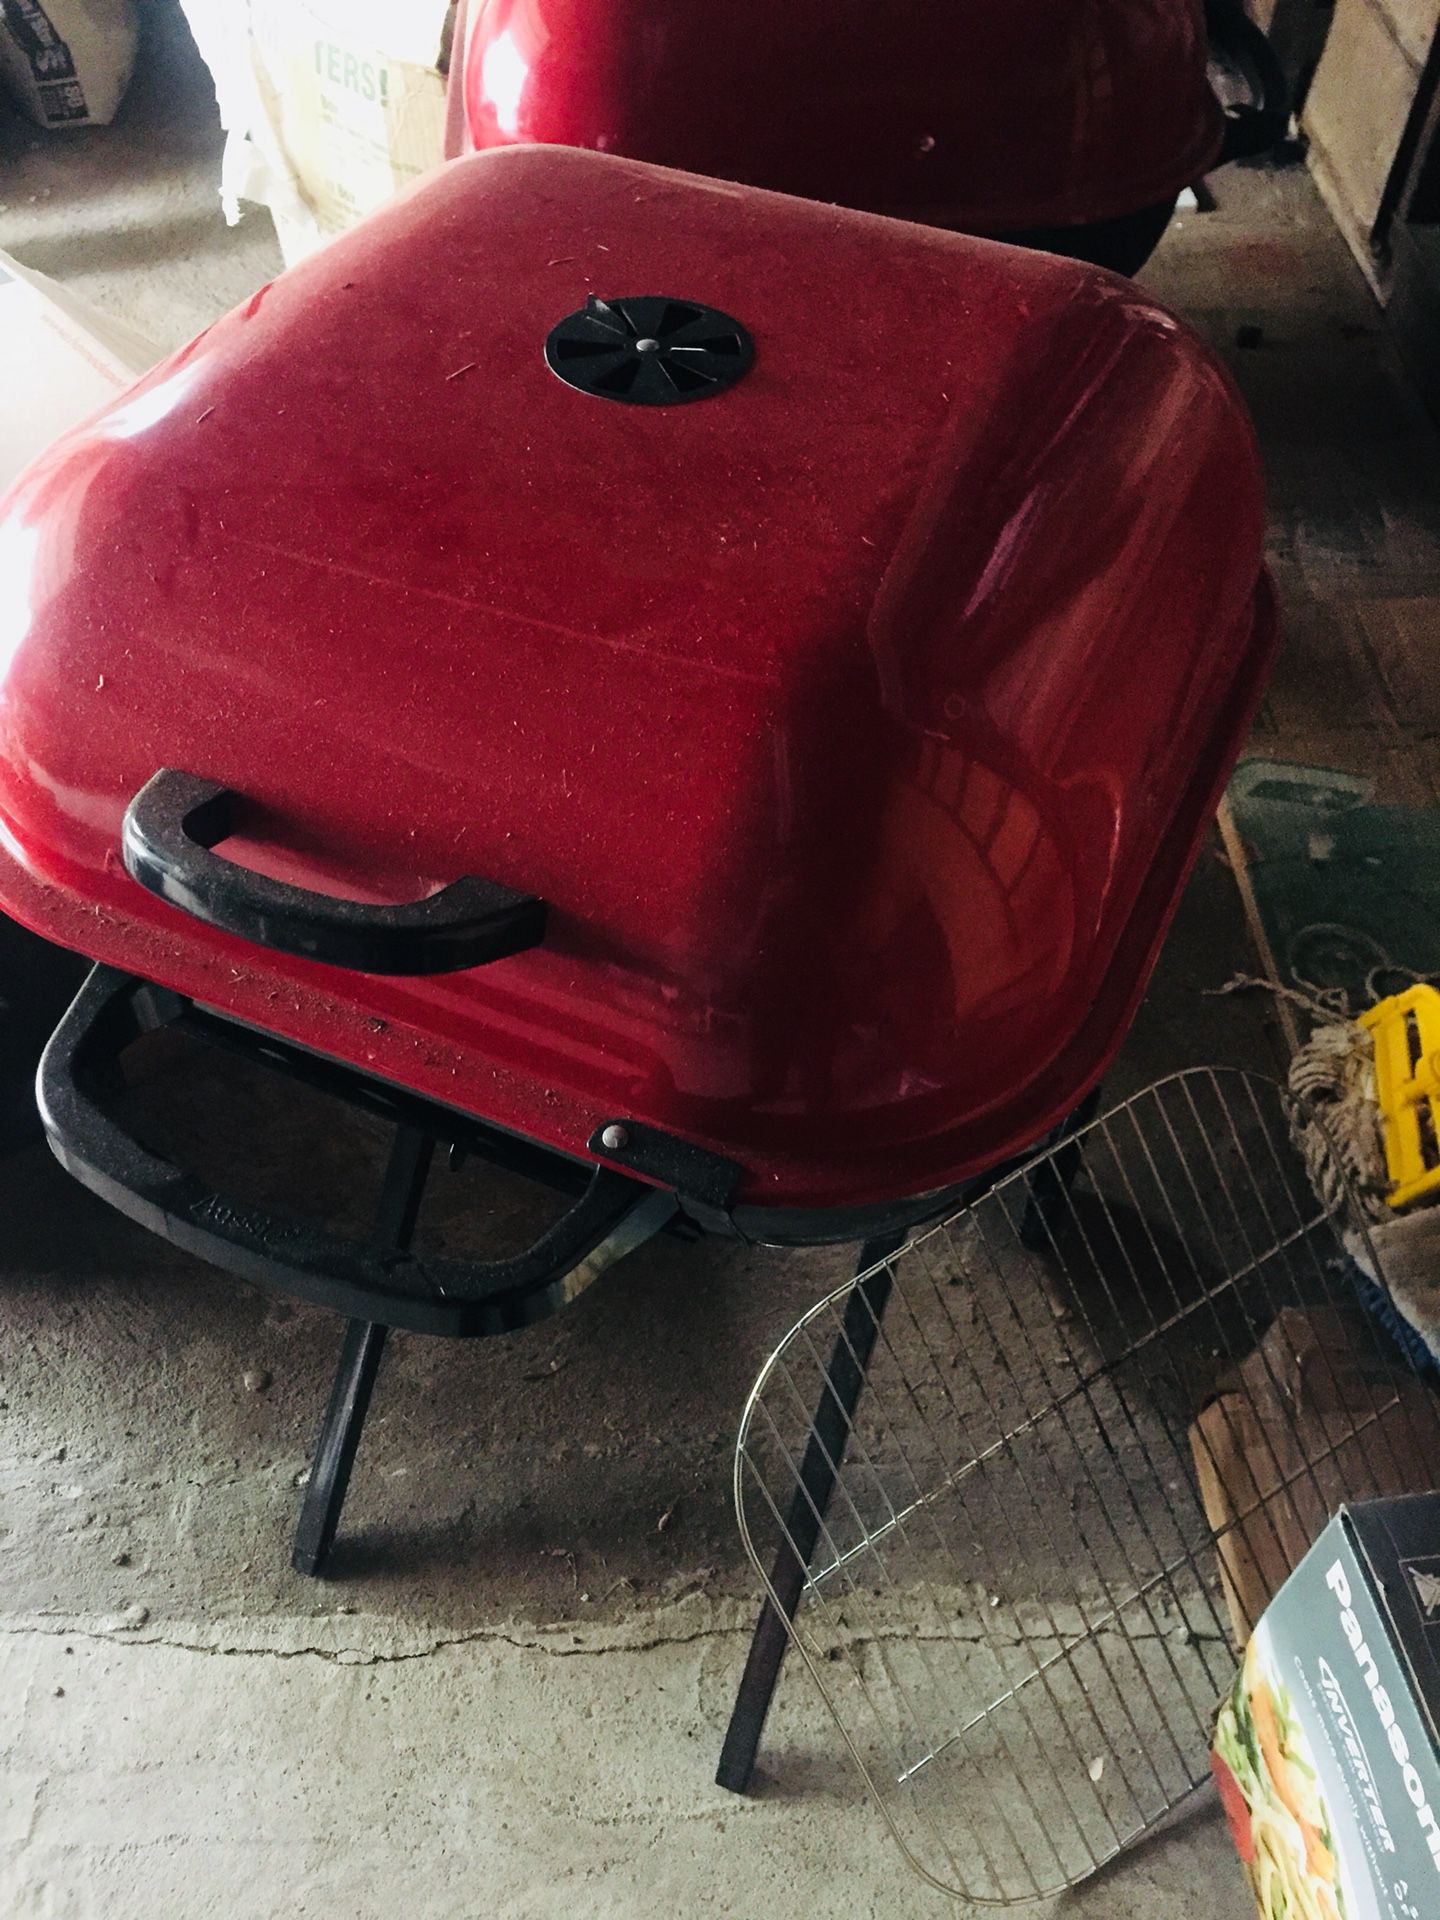 BBQ Charcoal Grill in Red